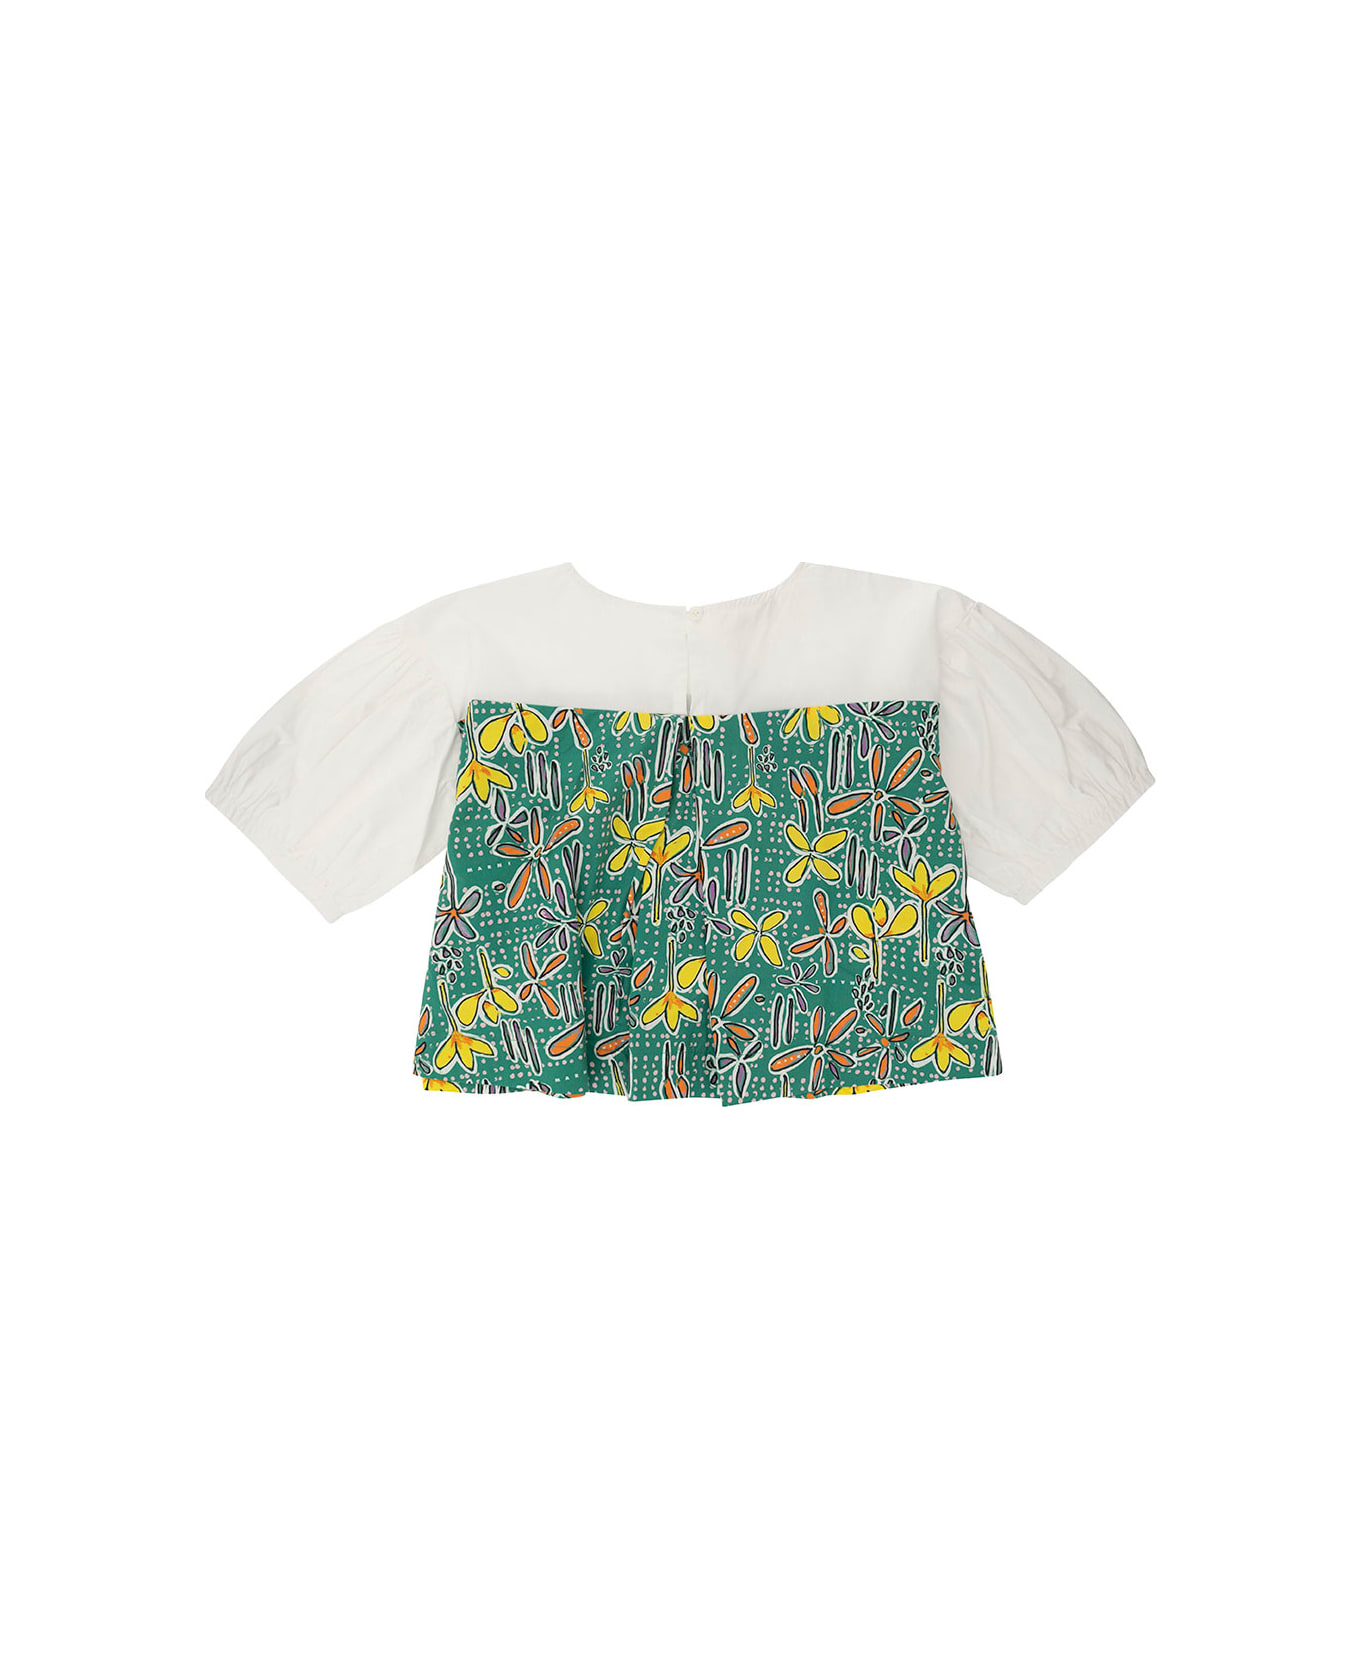 Marni Multicolor Blouse With Flower Printed Elastic Insert In Cotton Girl - Green シャツ